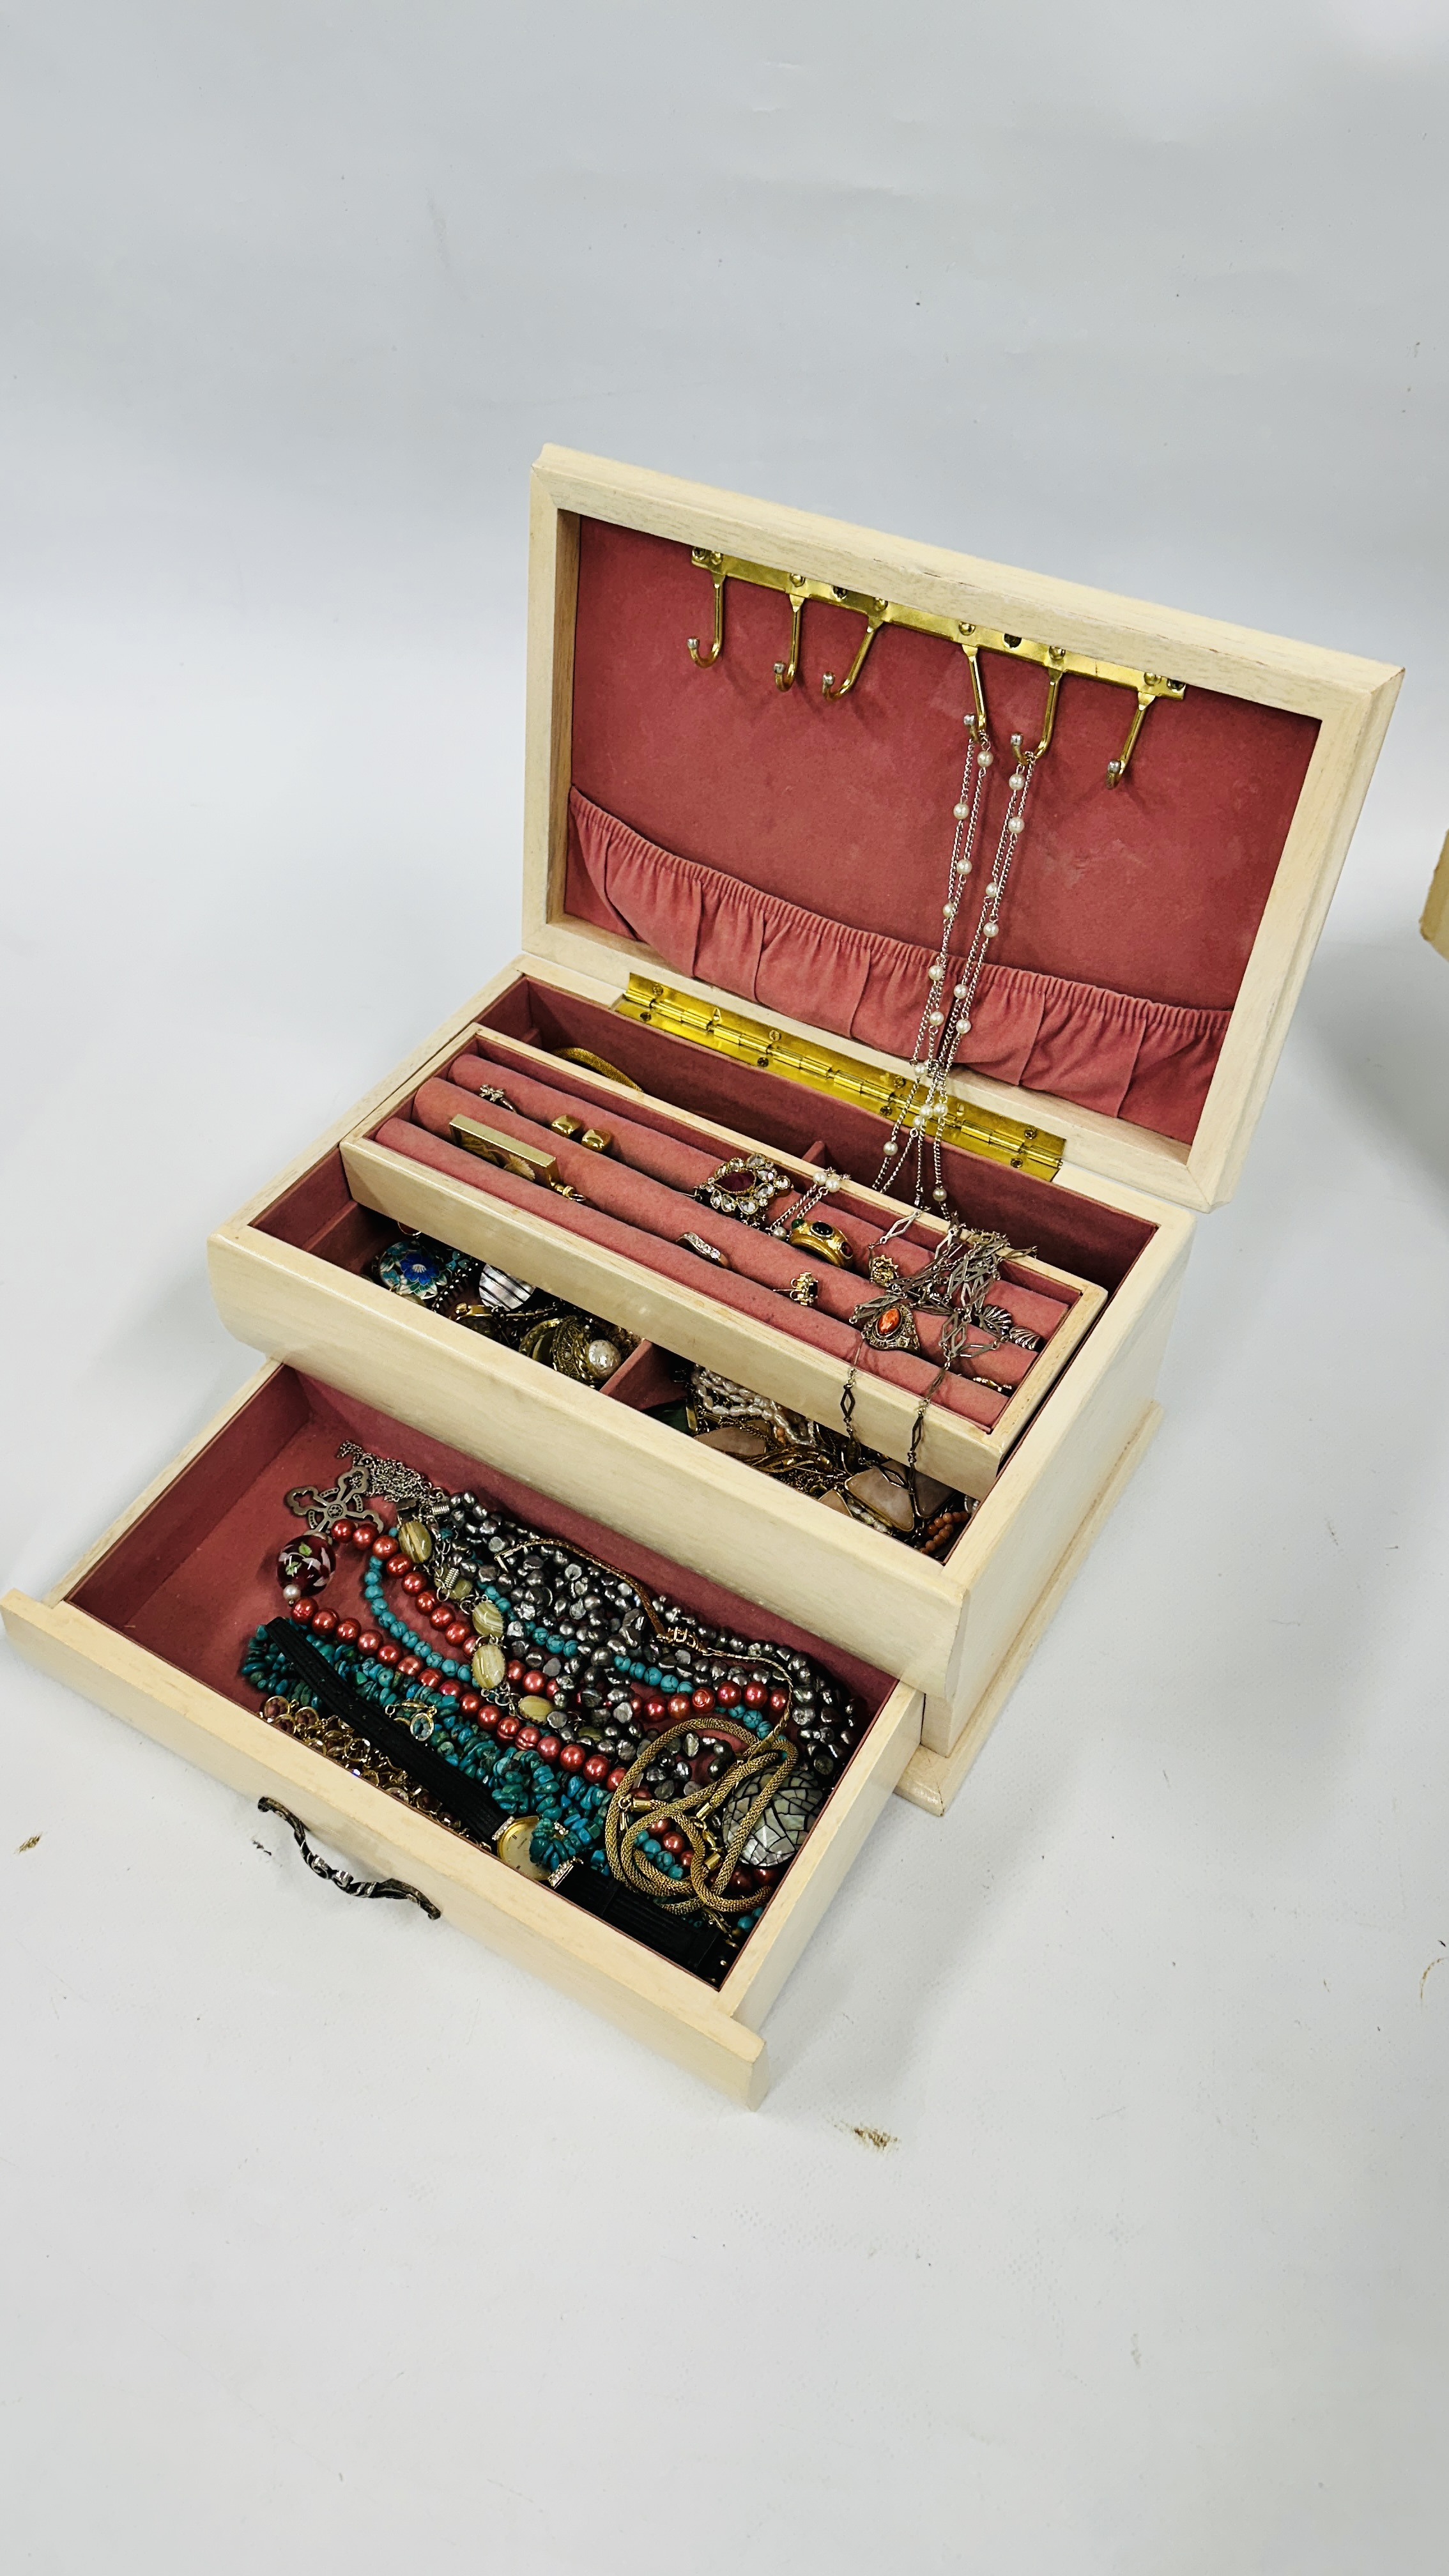 A MODERN WOODEN JEWELLERY BOX CONTAINING NECKLACES, LOCKET, STONE SET RINGS, BEADS, EARRINGS,